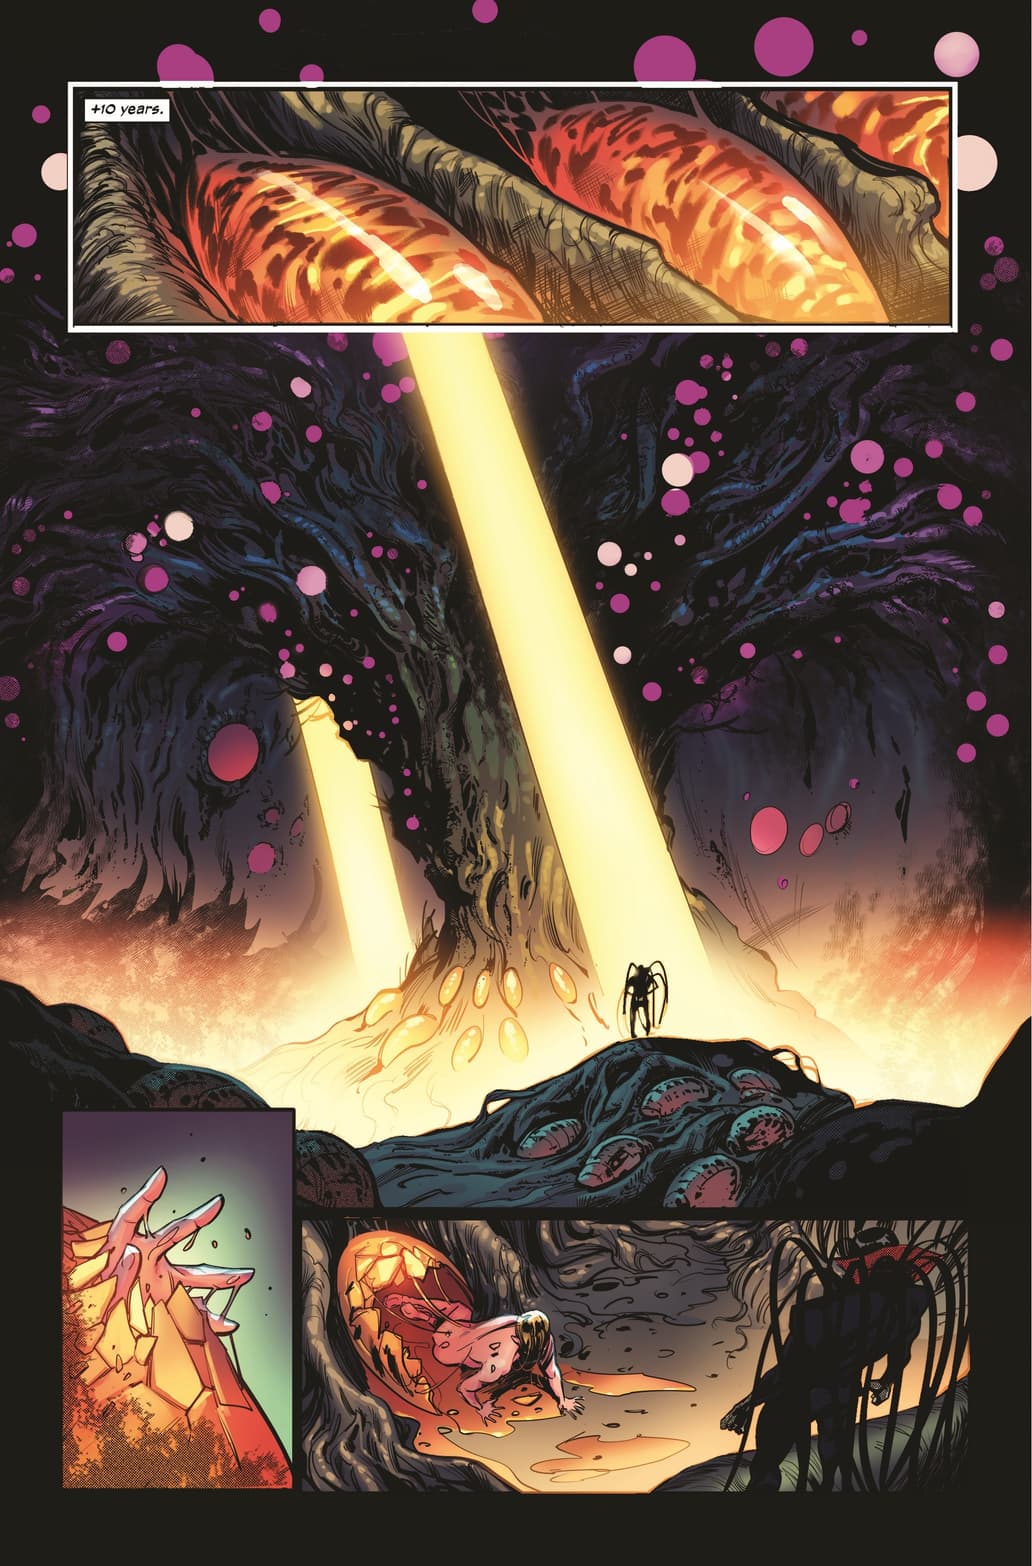 SINS OF SINISTER #1 page by Kieron Gillen and Lucas Werneck